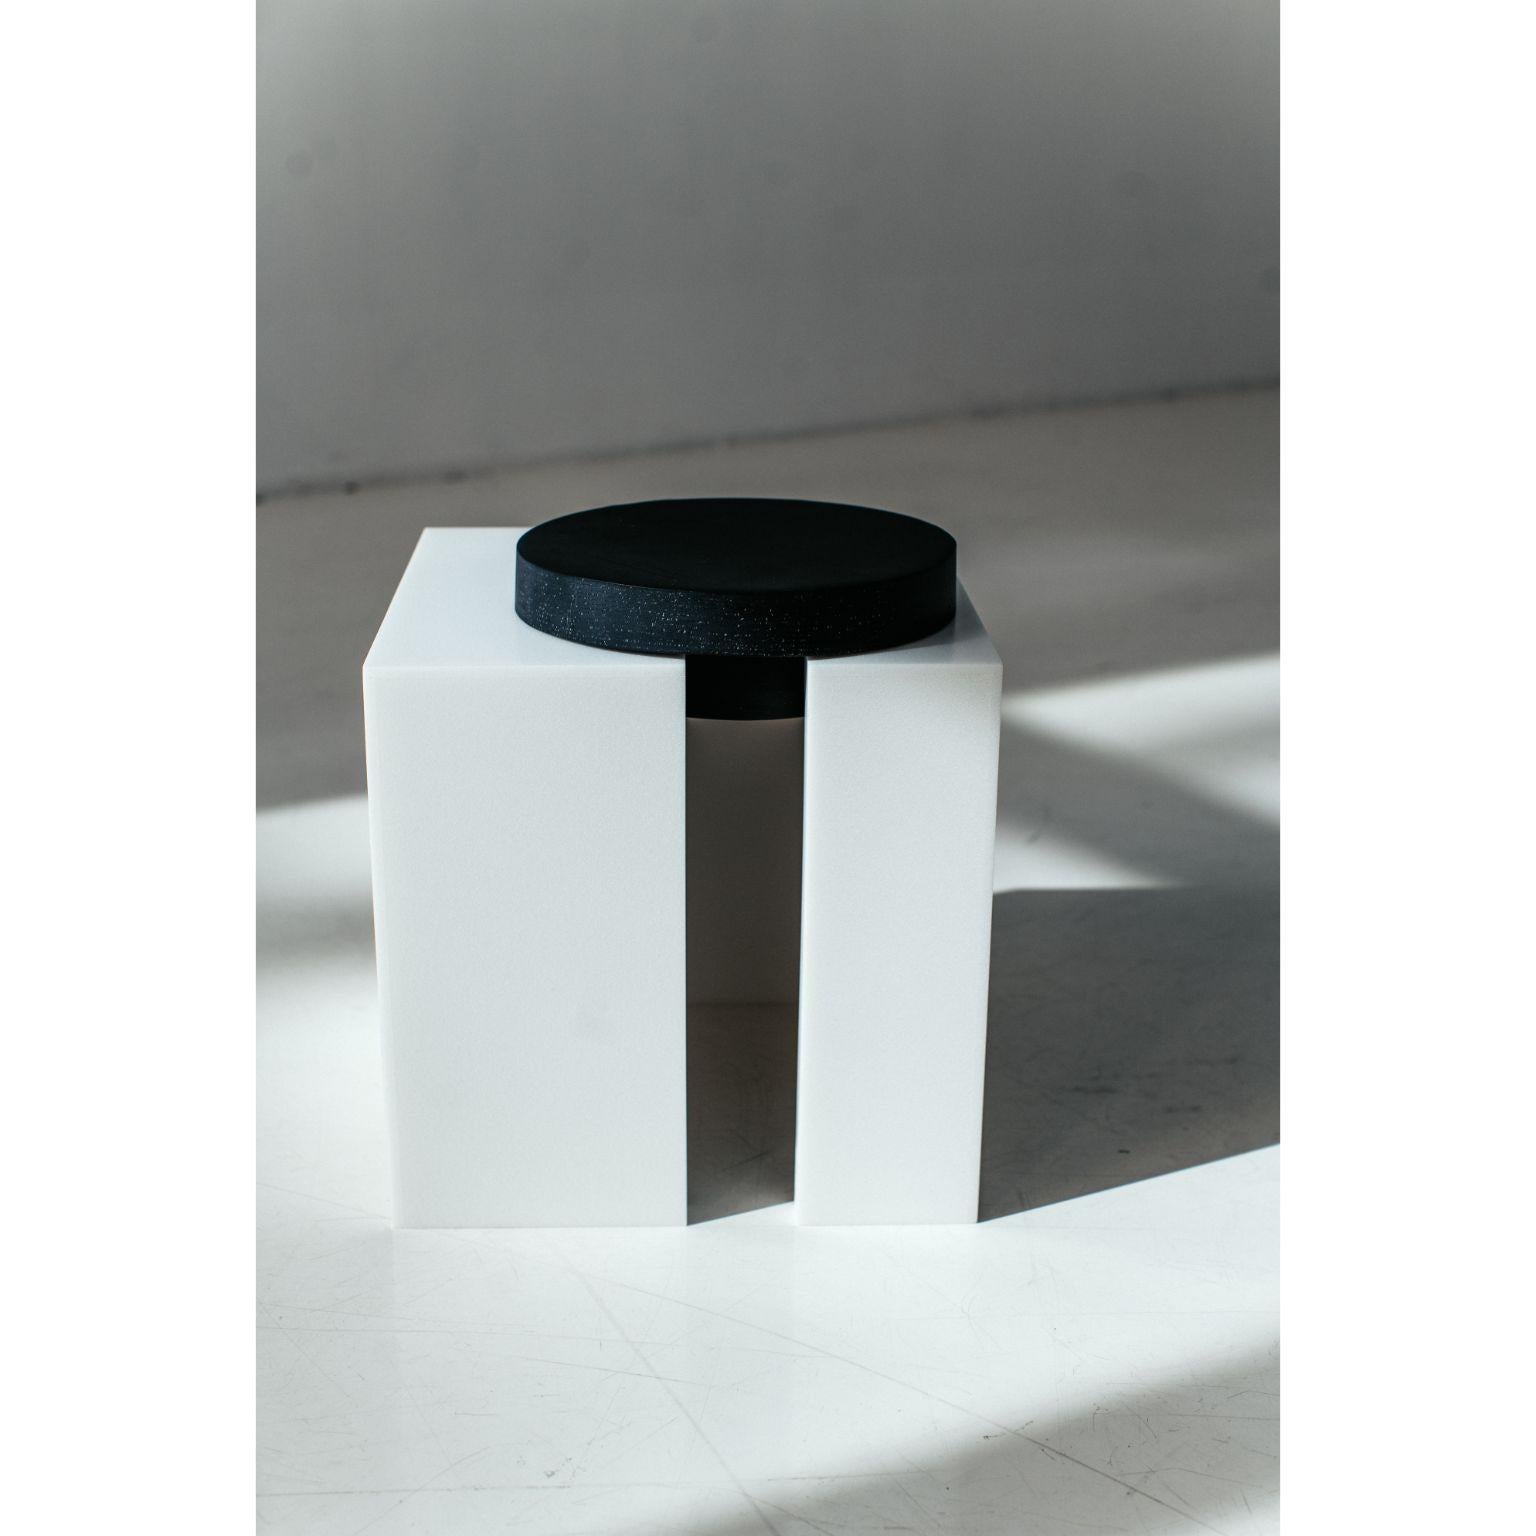 BOY side table by Ira Boyko
Dimentions: D 33 x W 33 x H 33 cm
Materials: glass, stone Thassos

It has an image of a very delicate and beautiful self-expression. it is also based on k. malevich art. style, created by coco chanel as a collective